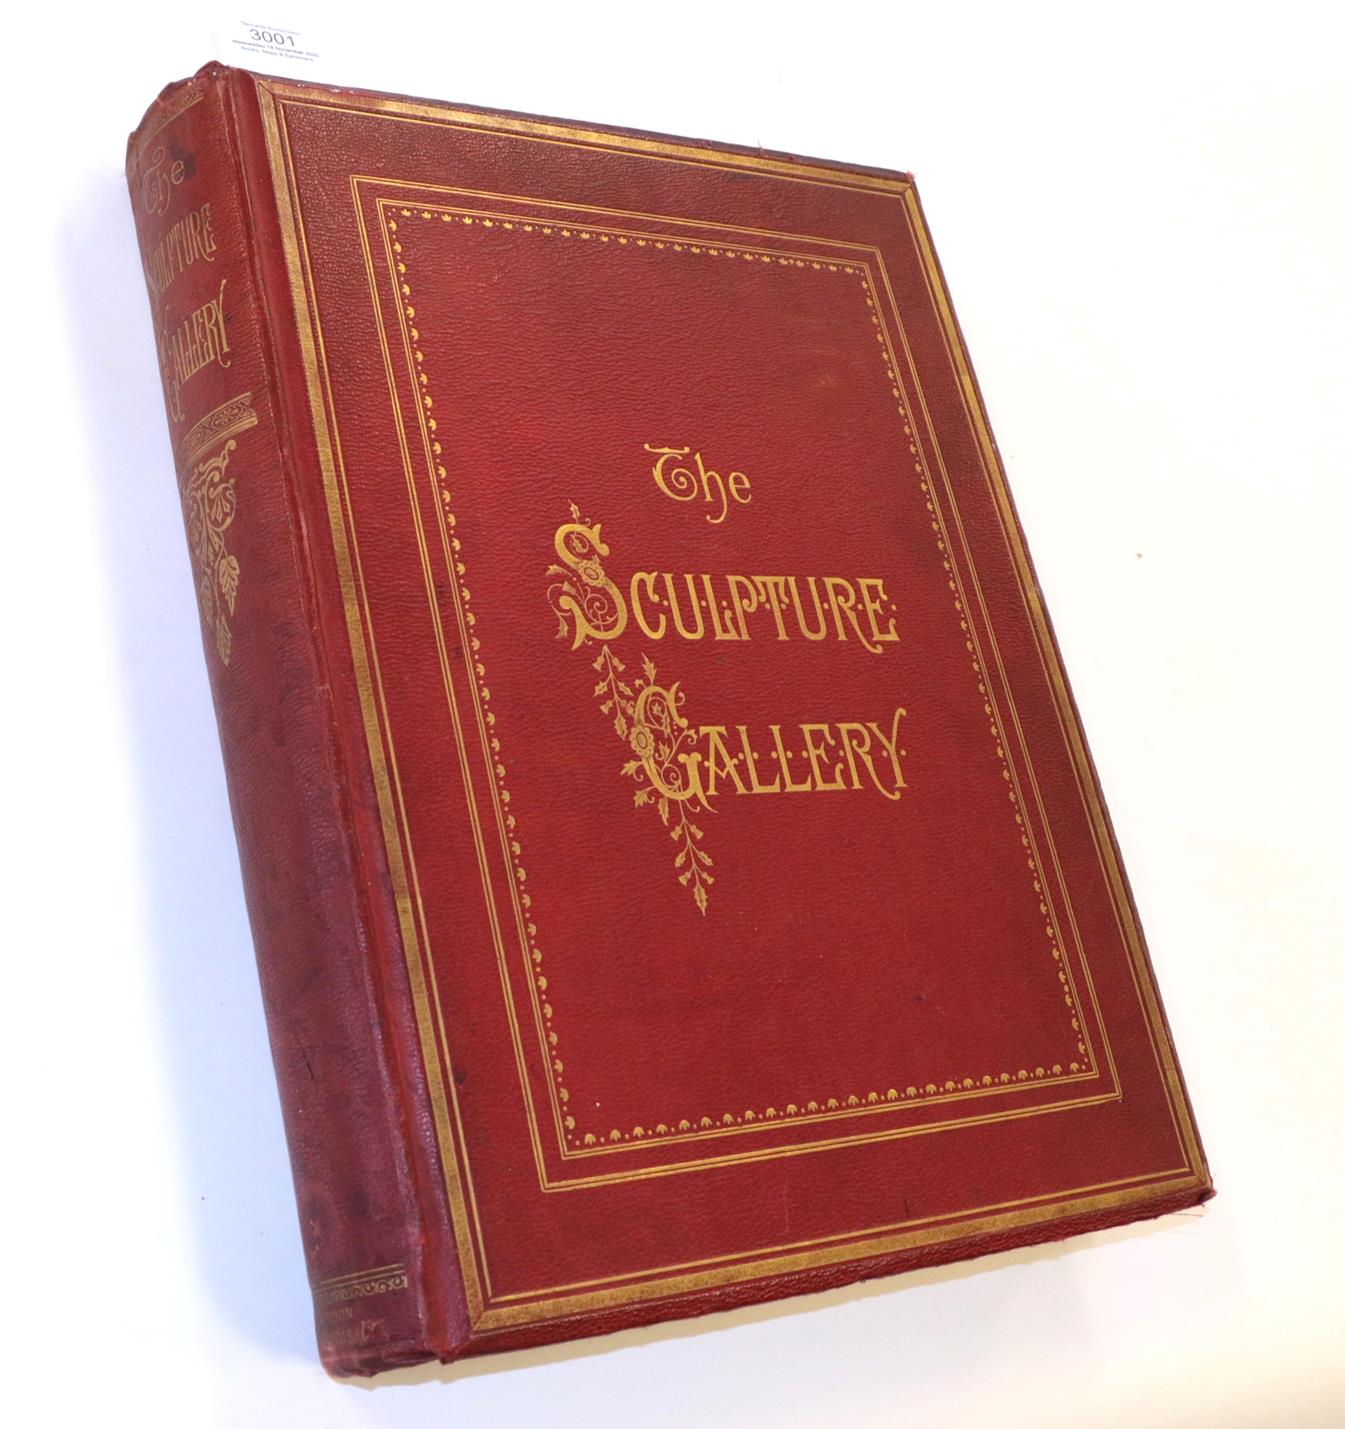 Lot 3001 - Sculpture The Gallery of British Sculpture, Being a Collection of Sixty-One Steel Engravings...